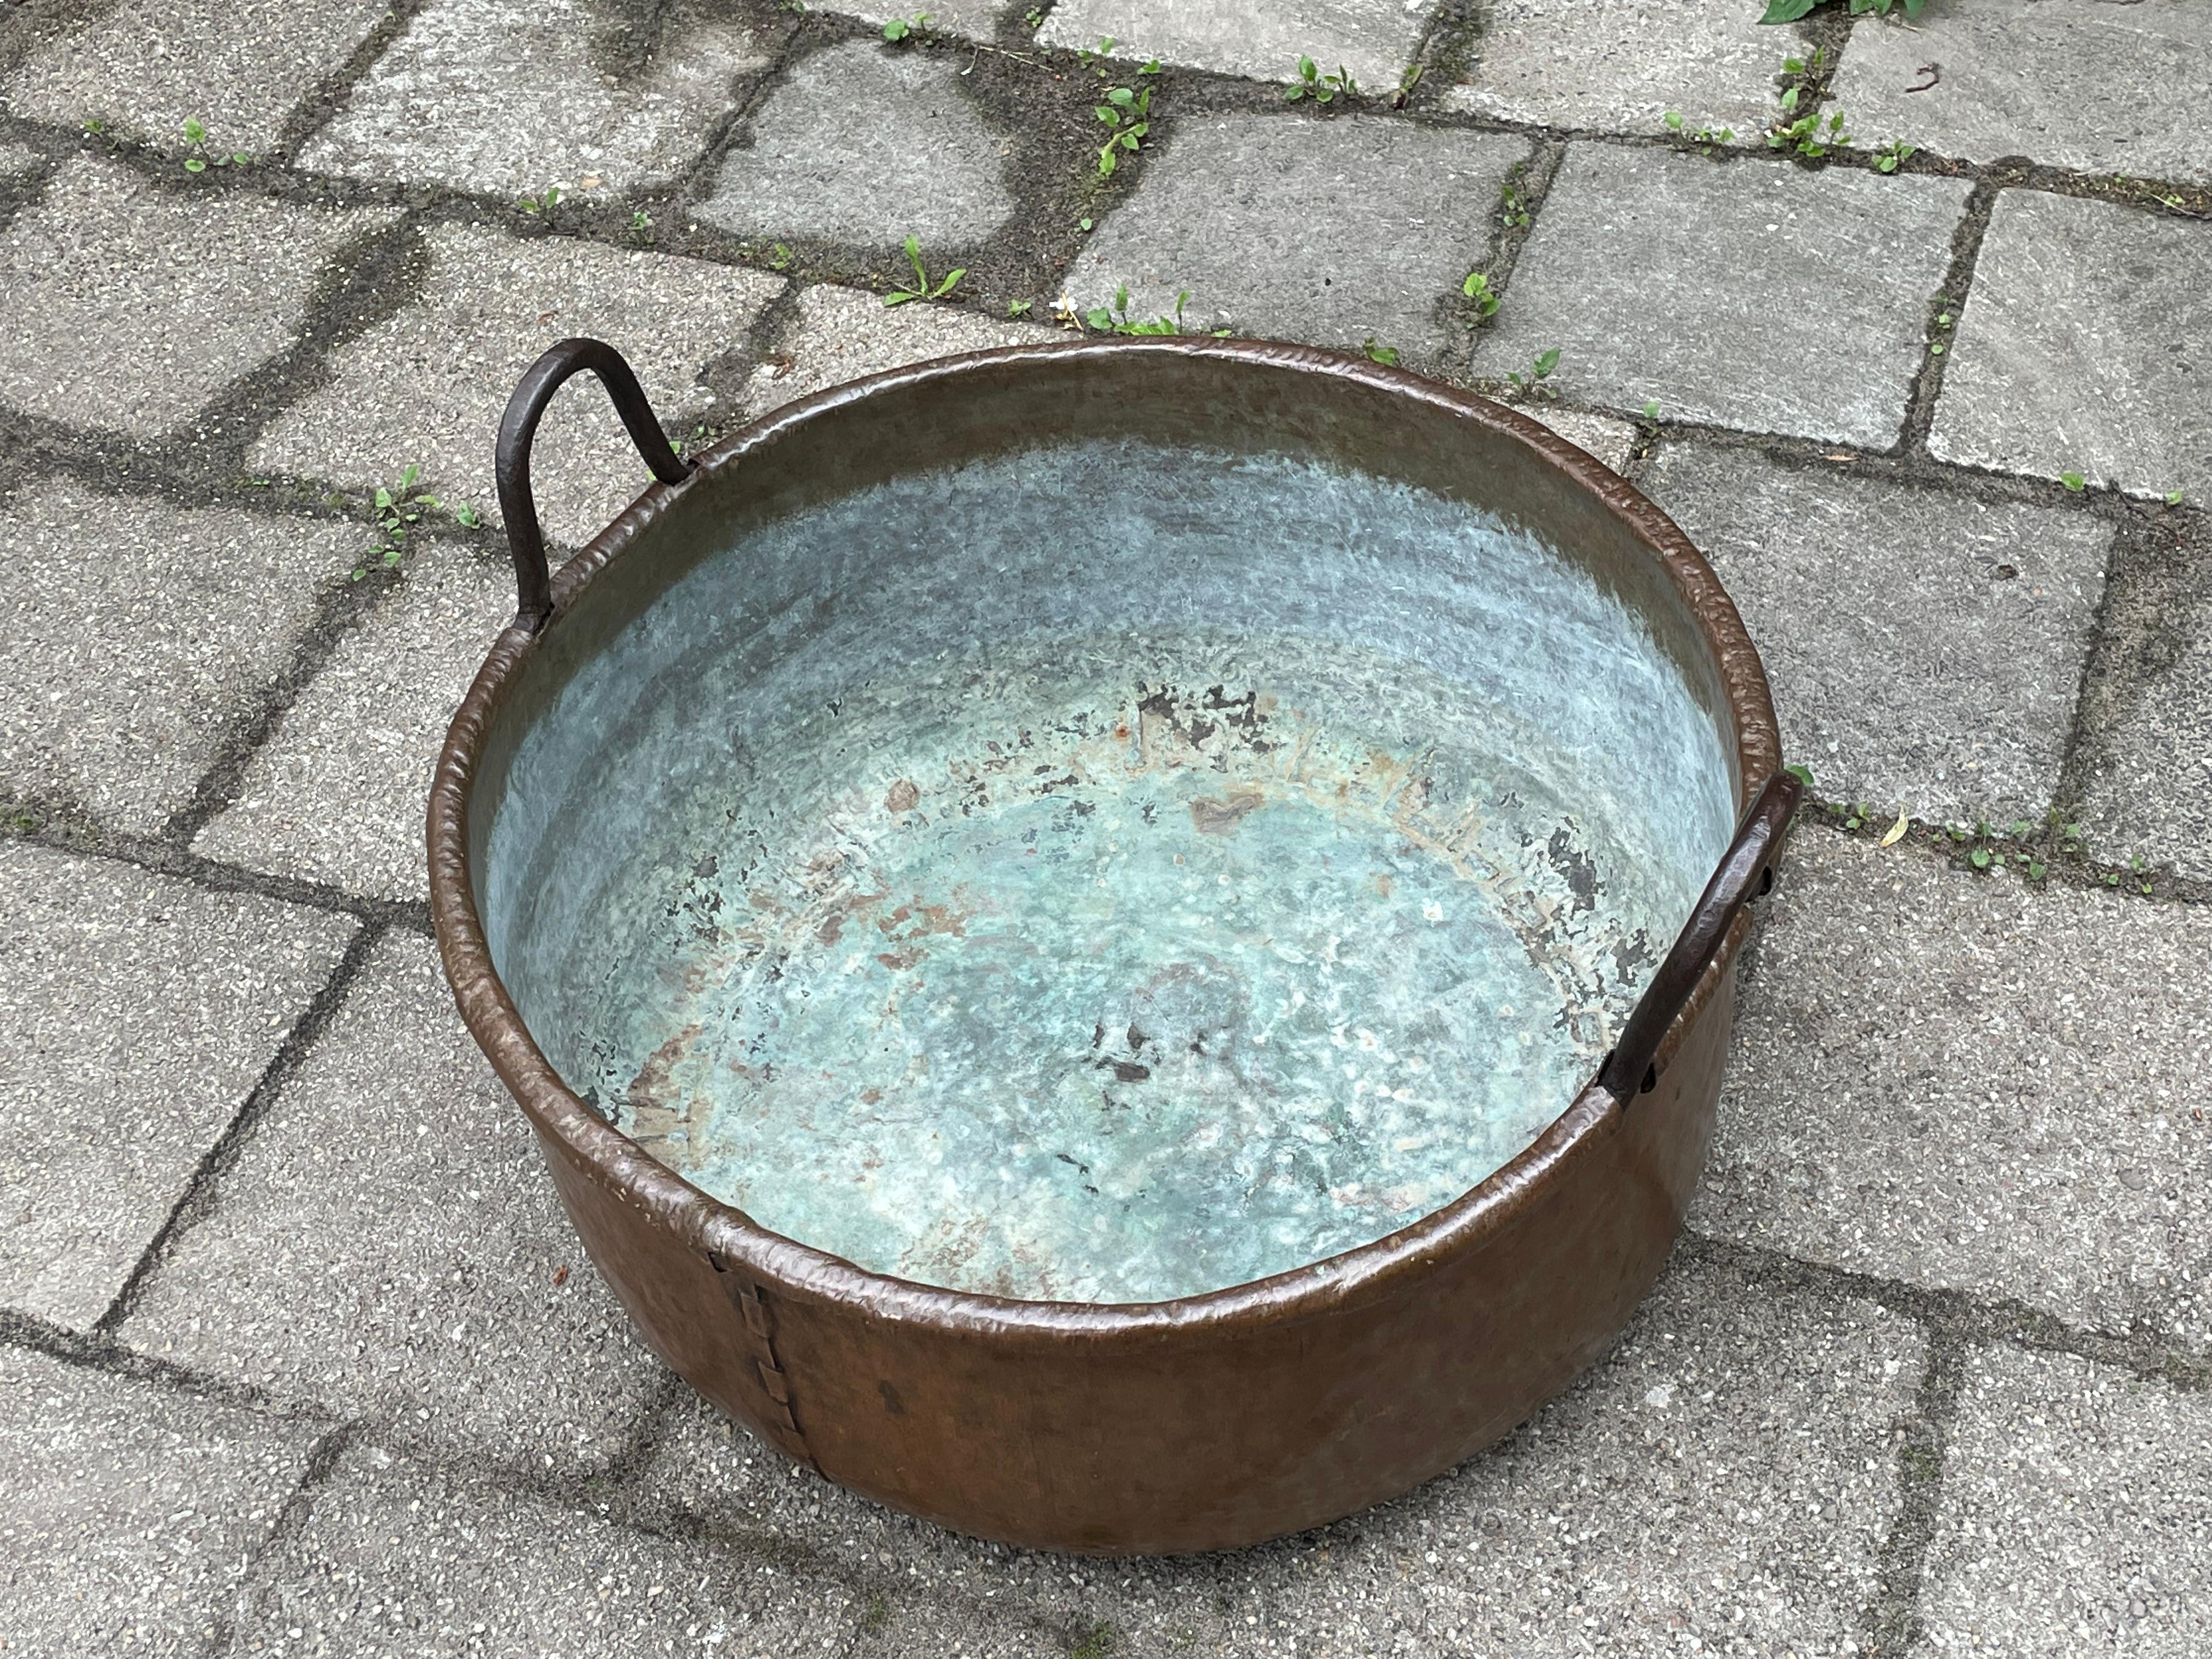 Extra large, all handcrafted and great looking copper firewood bucket.

Only if you were a very wealthy person in Holland in the early 1800s, would you be able to afford this large, impressive and all-handcrafted bucket. This stunning and tactile